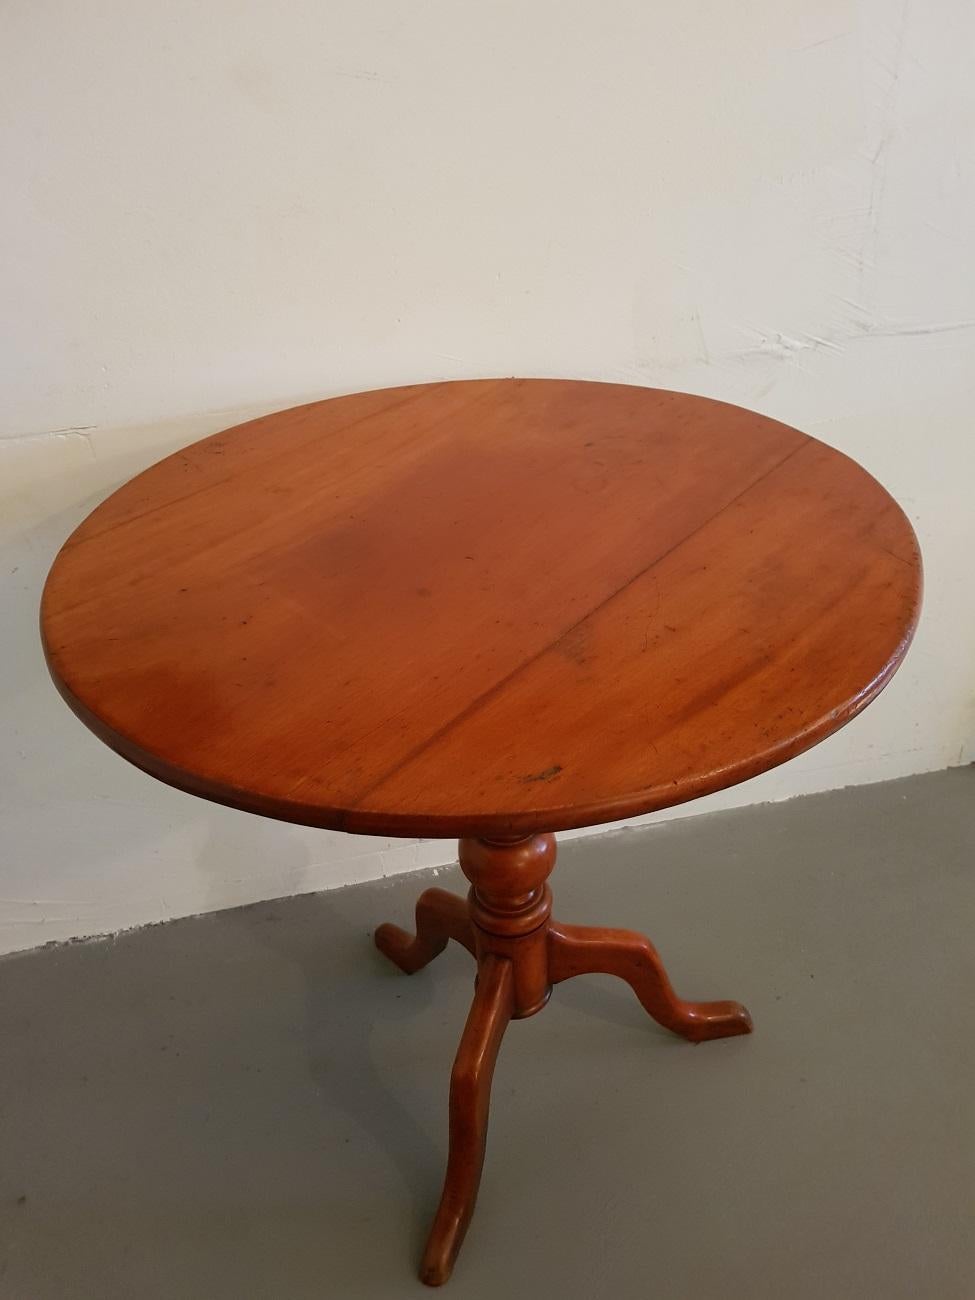 A lovely mid-19th century English mahogany tilt-top wine table standing on a tripod, with wear consistent by age and use.

The measurements are,
Depth 65 cm/ 25.5 inch.
Width 65 cm/ 25.5 inch.
Height 72 cm/ 28.3 inch.